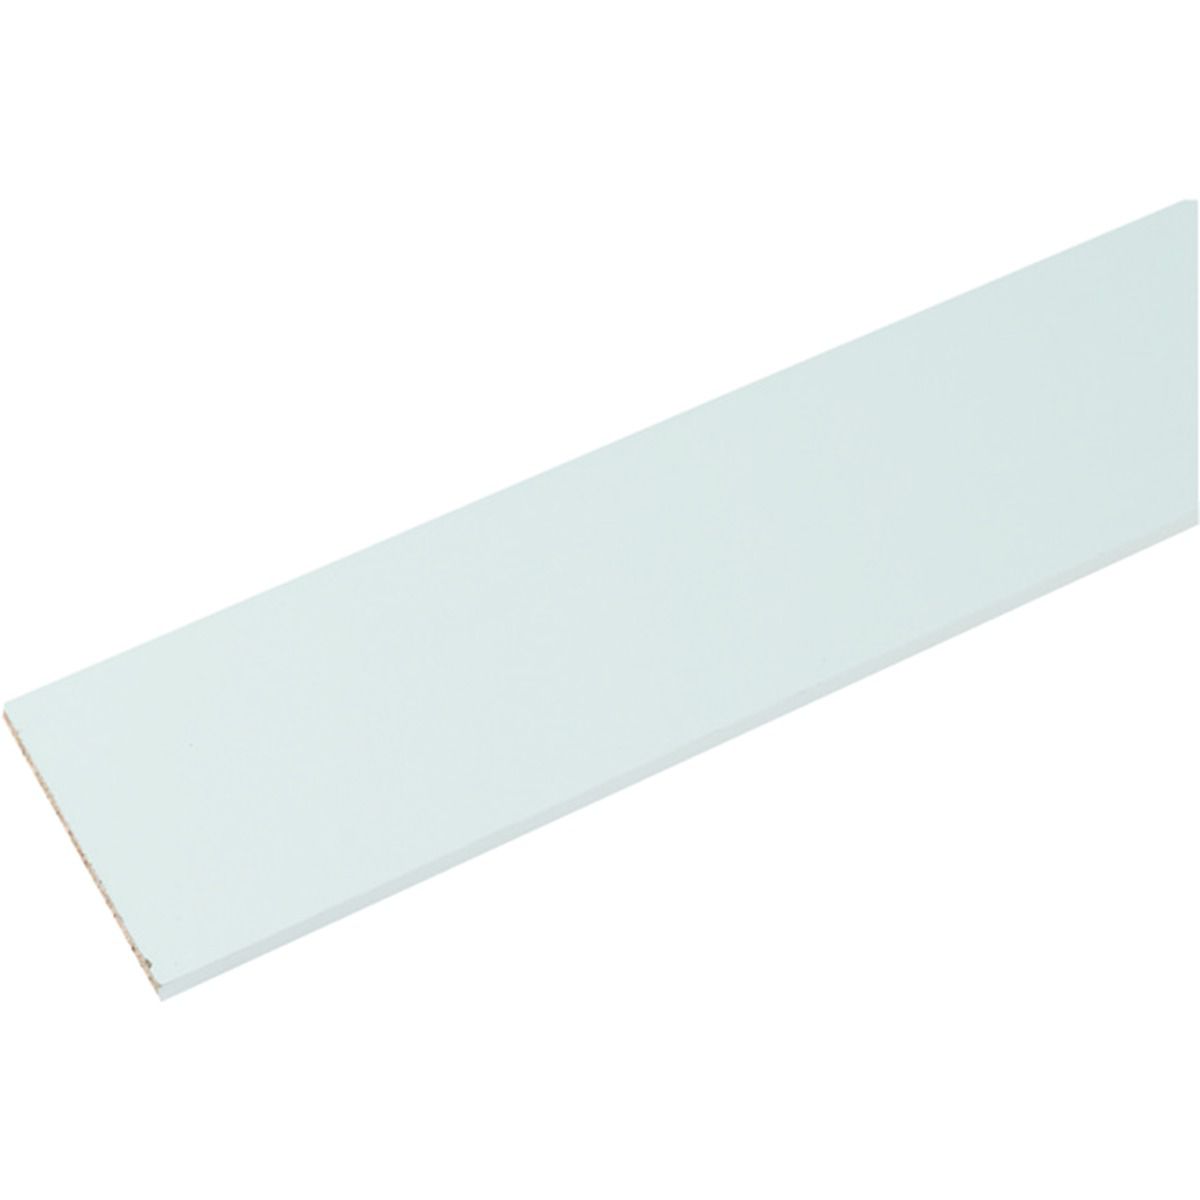 Image of Wickes MFC White Furniture Panel - 15mm x 300mm x 2400mm